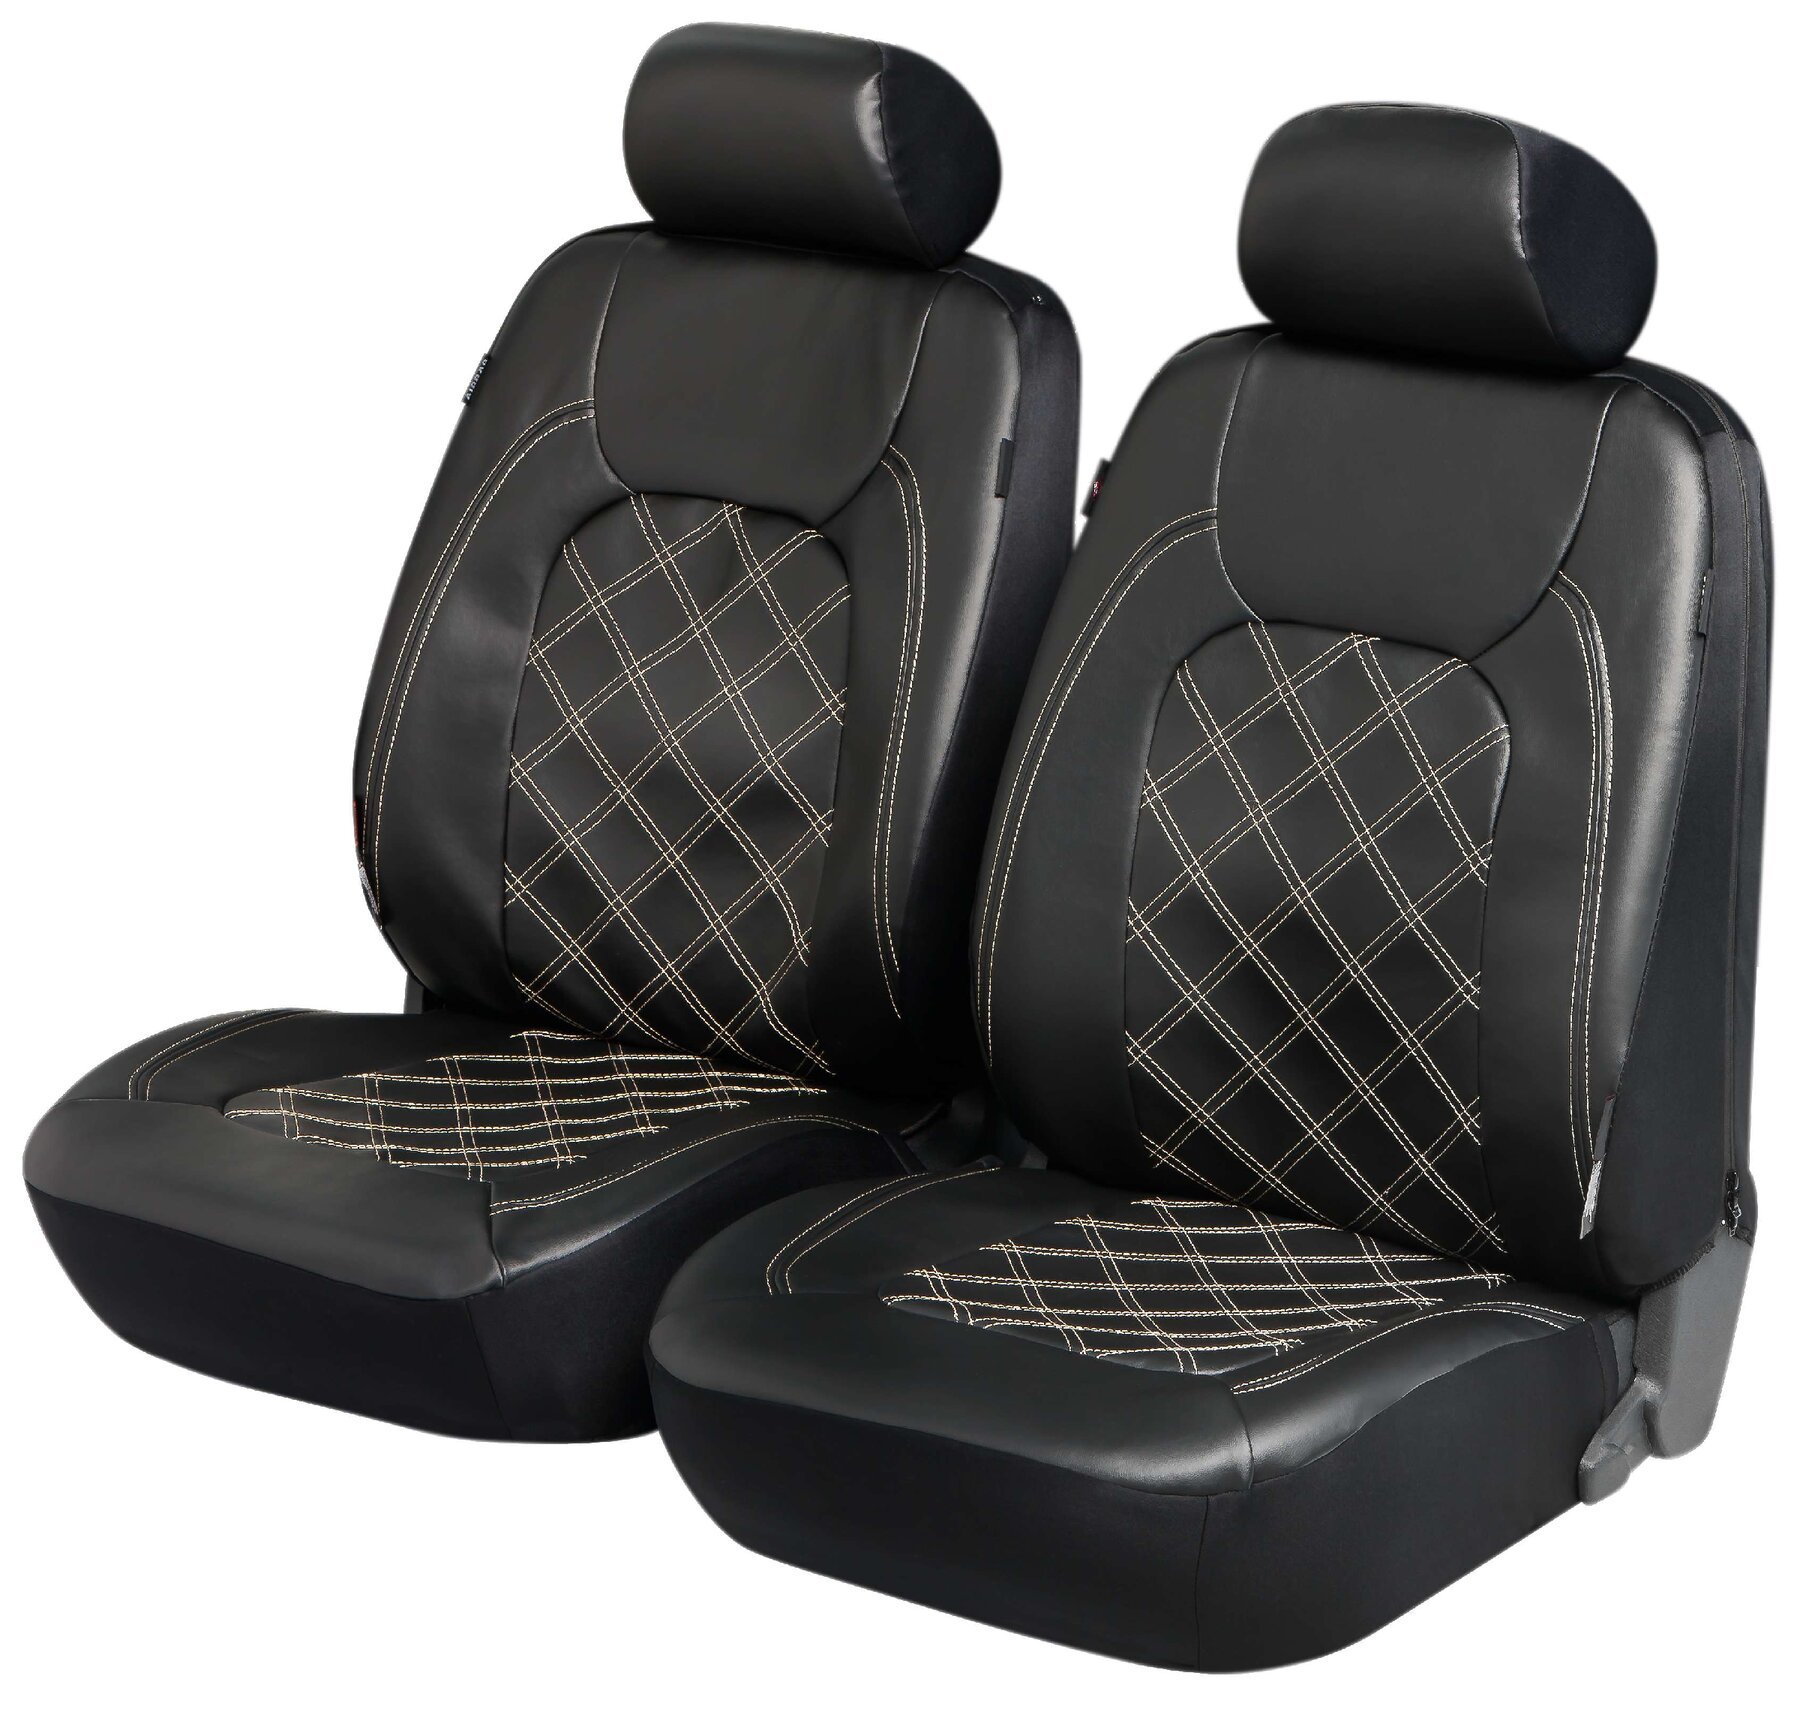 ZIPP IT Deluxe Paddington car Seat covers in imitation leather for two front seats with zipper system